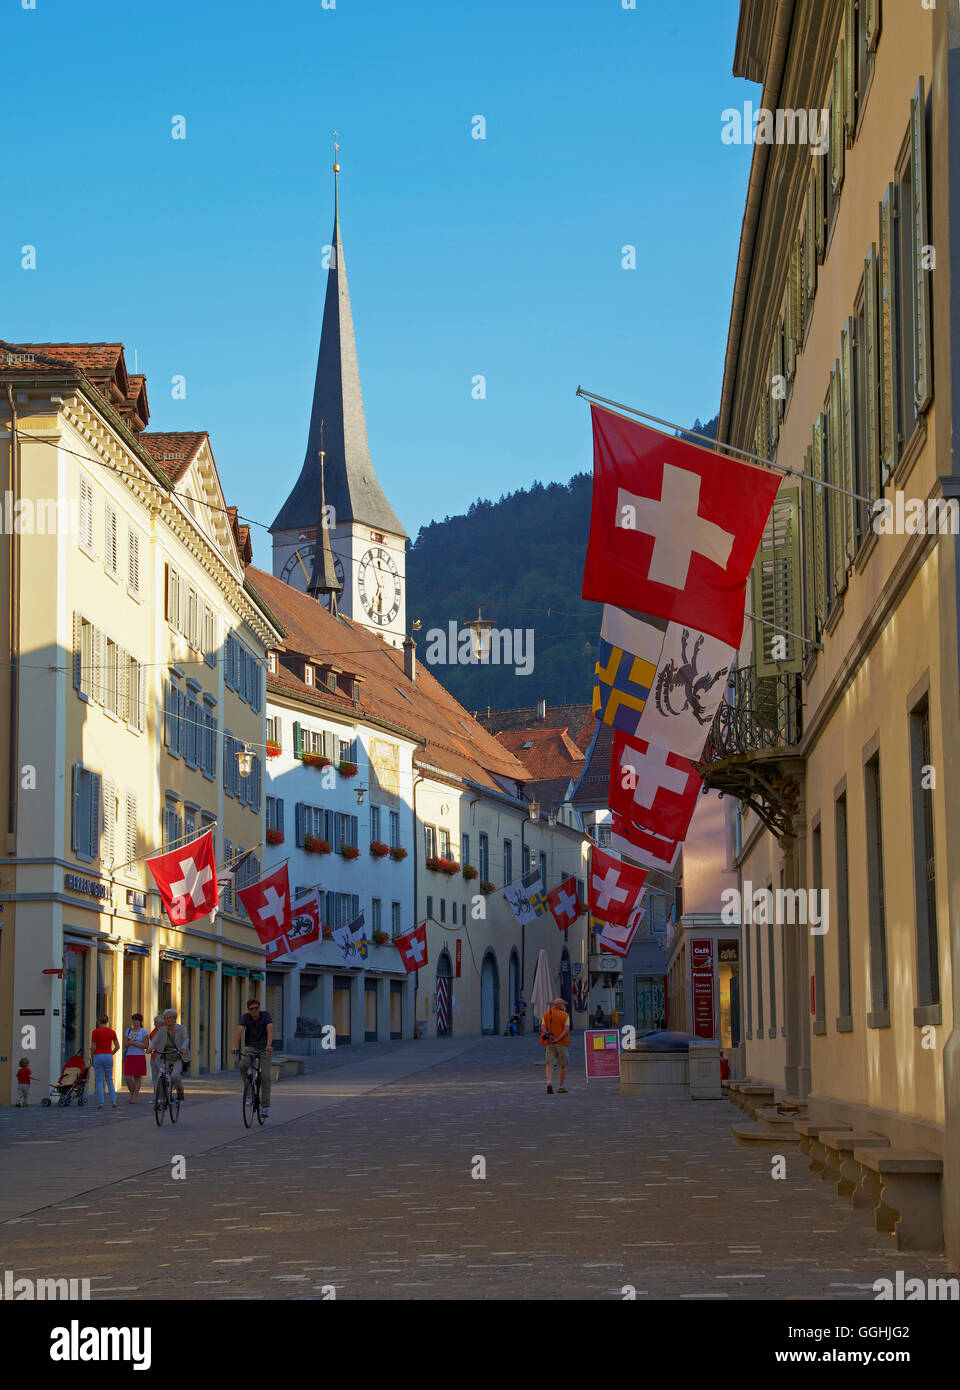 Poststrasse and tower of St. Martins church, Old city of Chur, Alpenrhein, Rhine, Canton of Grisons, Switzerland, Europe Stock Photo